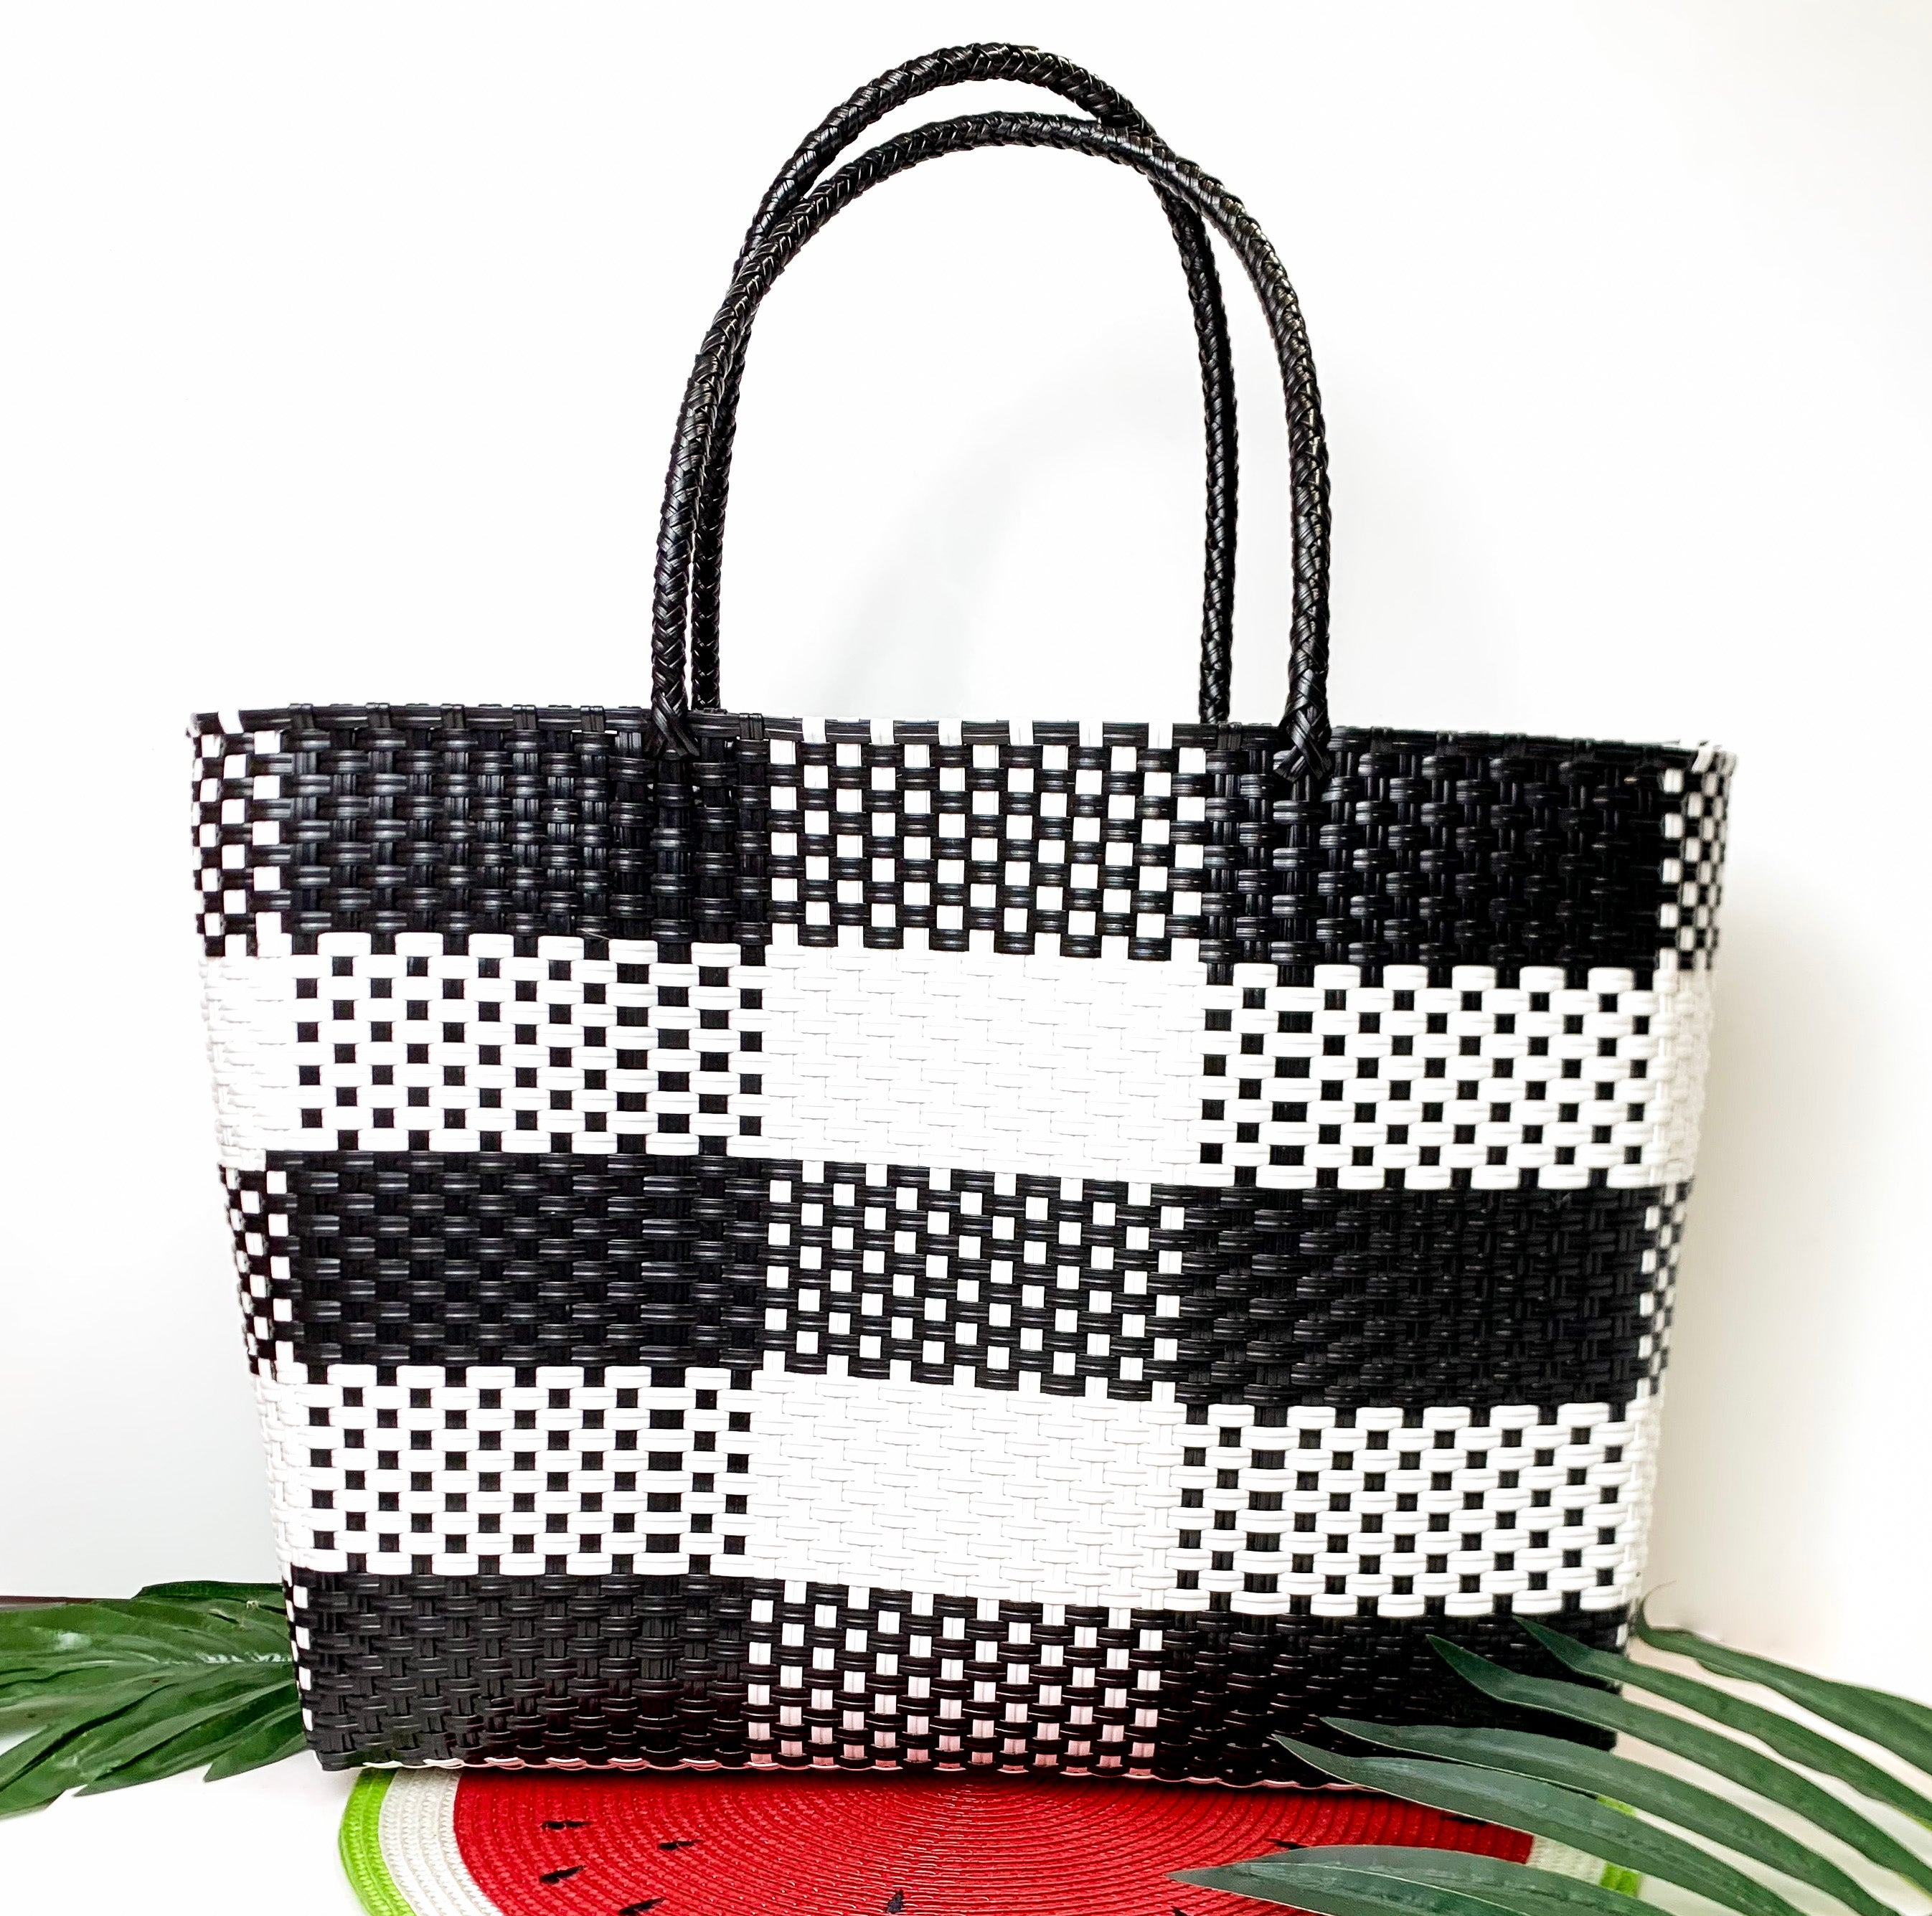 Garden Party Gingham Tote Bag in Black and White